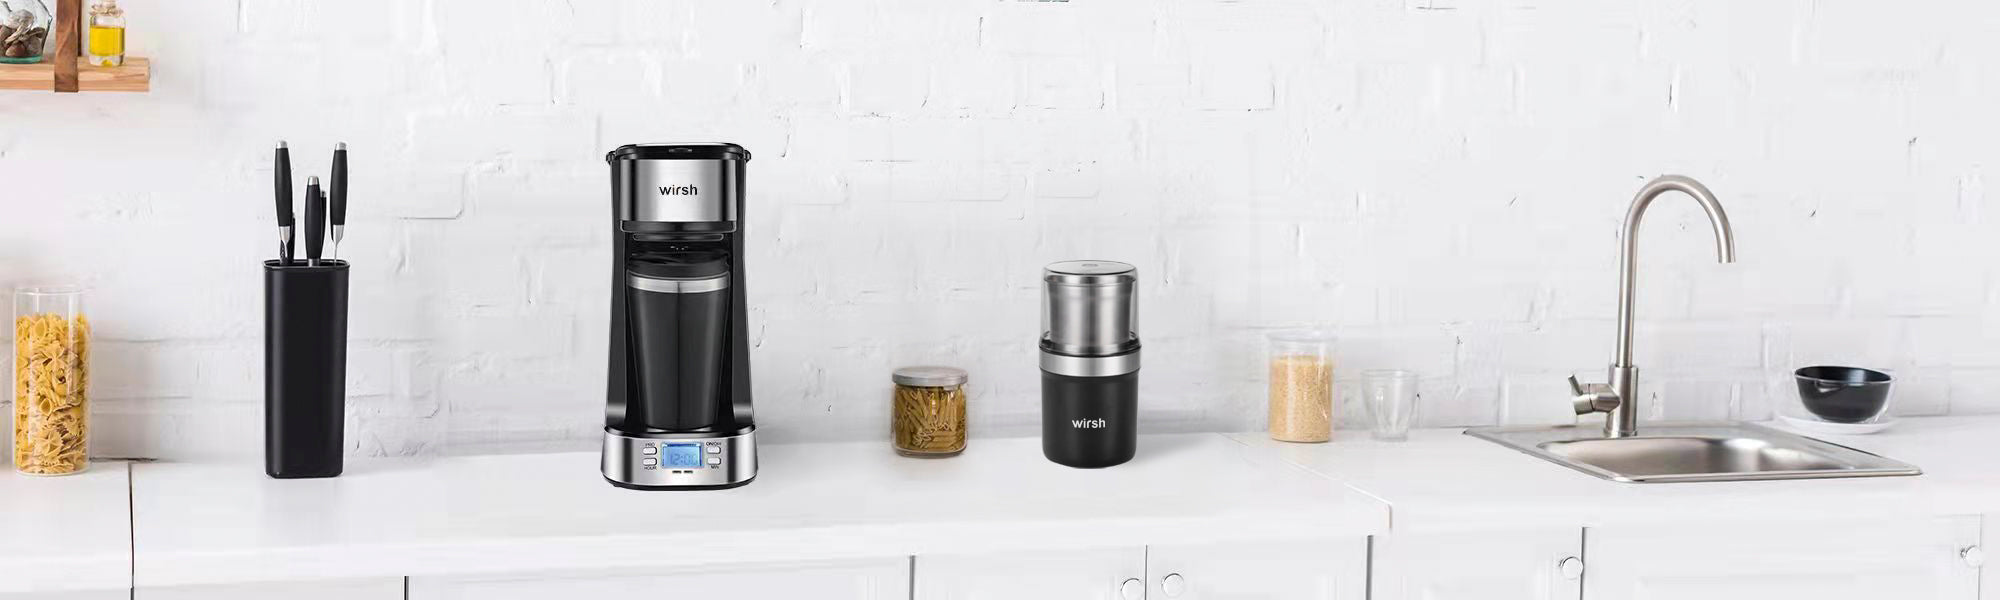 Wirsh Coffee Grinder – Electric Coffee grinder with Stainless